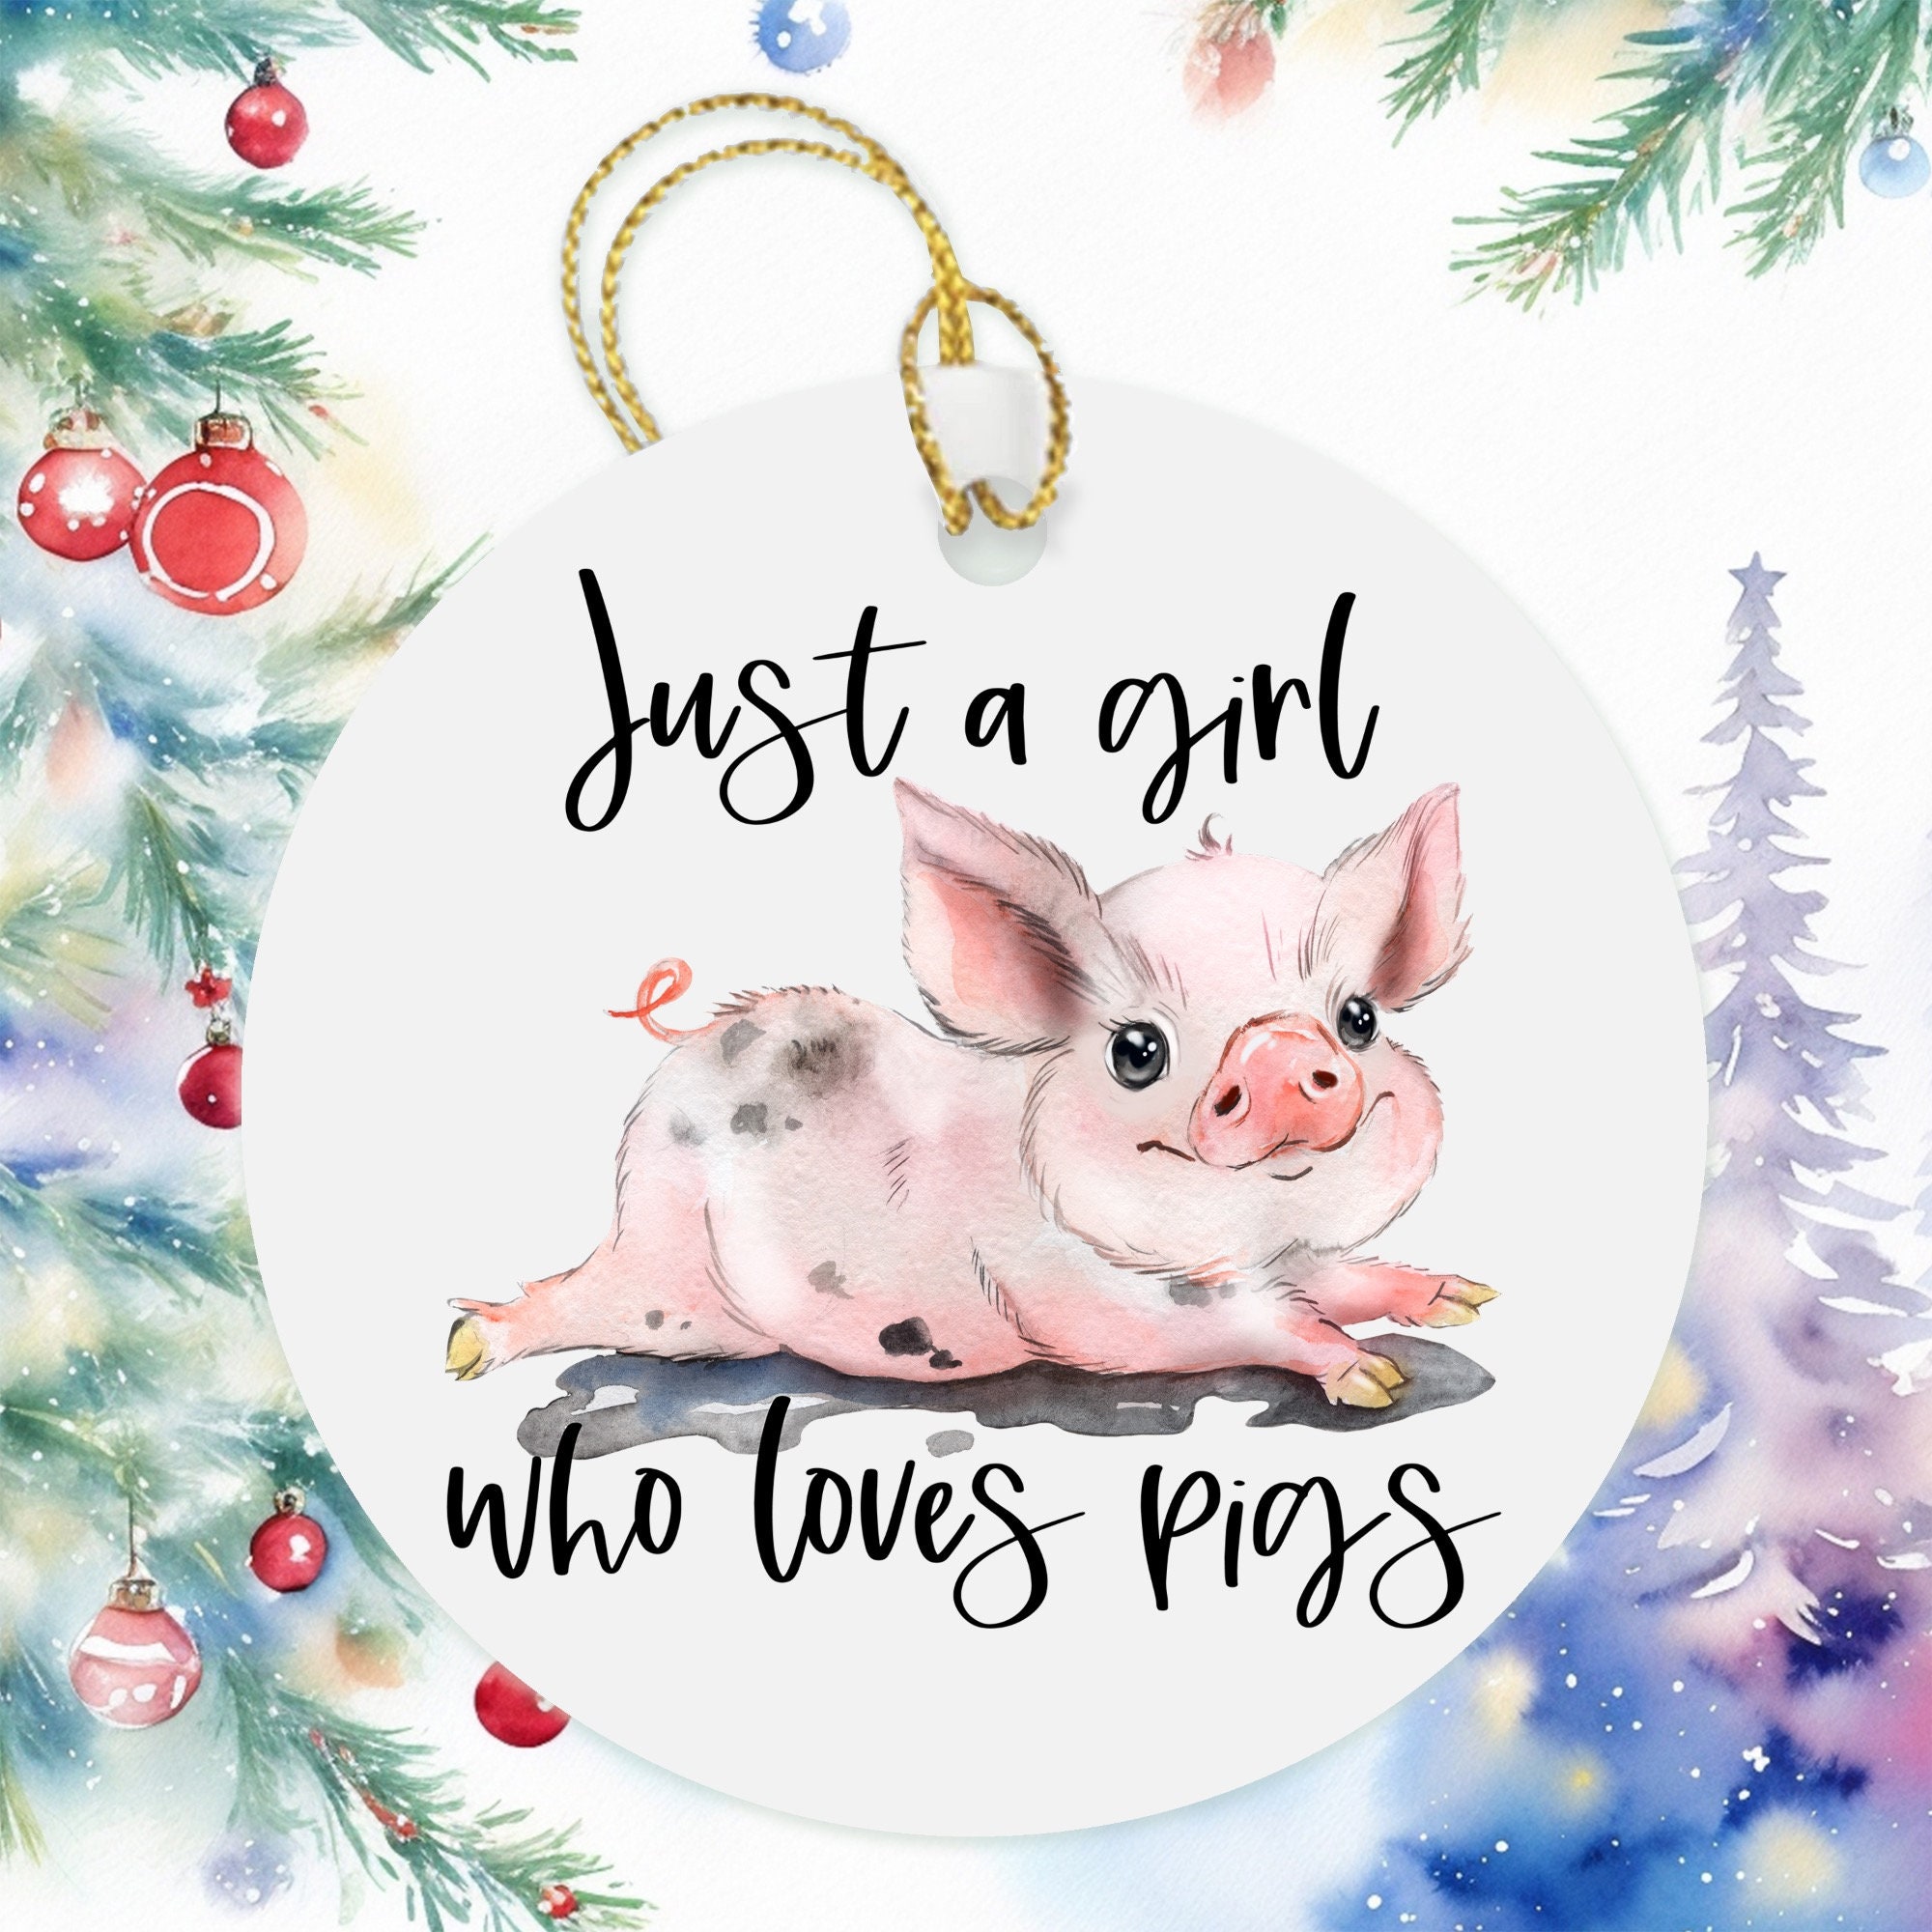 White Elephant Gift Tags – The Cracked Pig